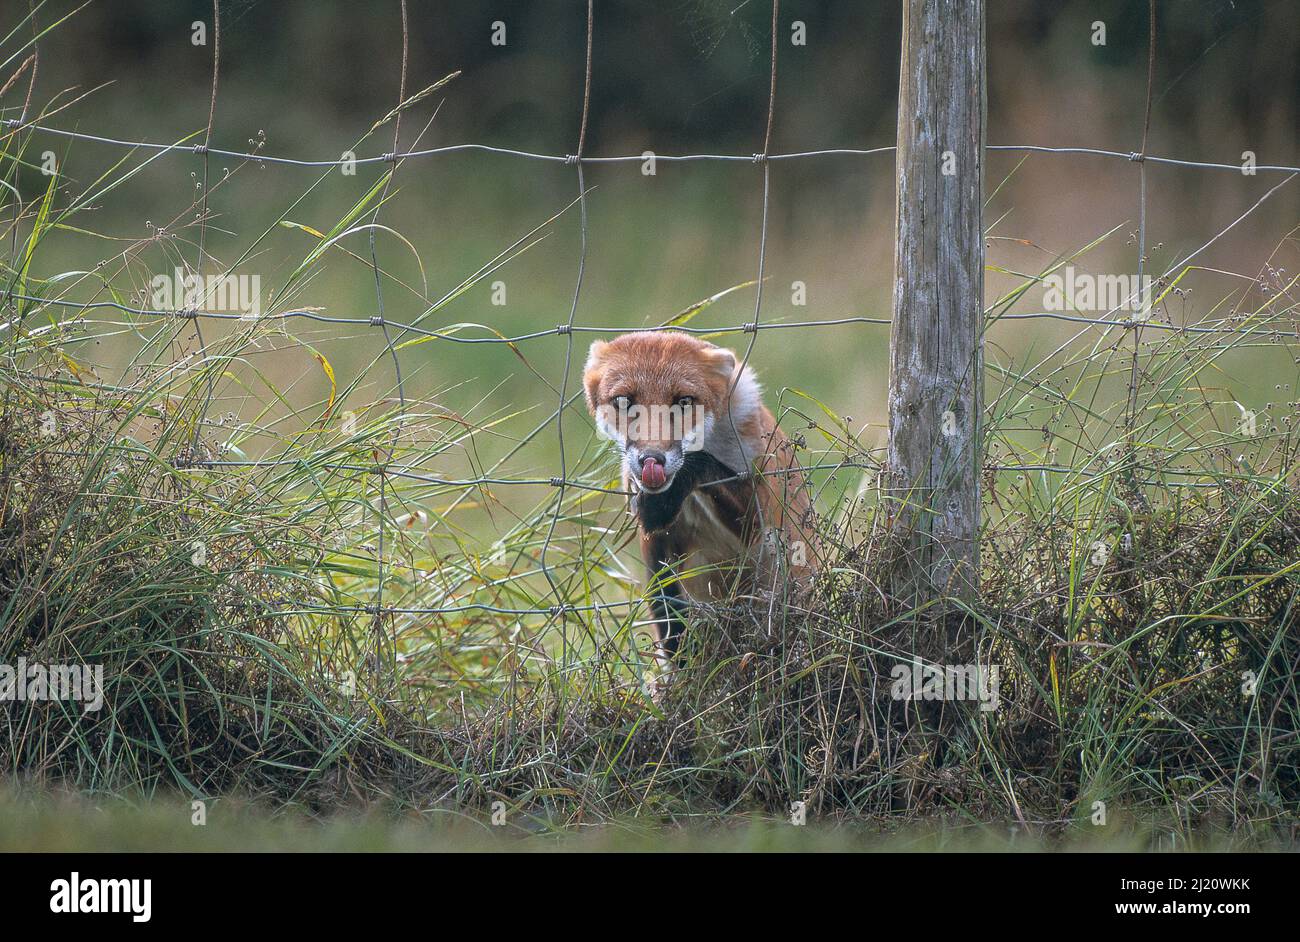 Red fox (Vulpes vulpes) climbing through wire fence. Stock Photo